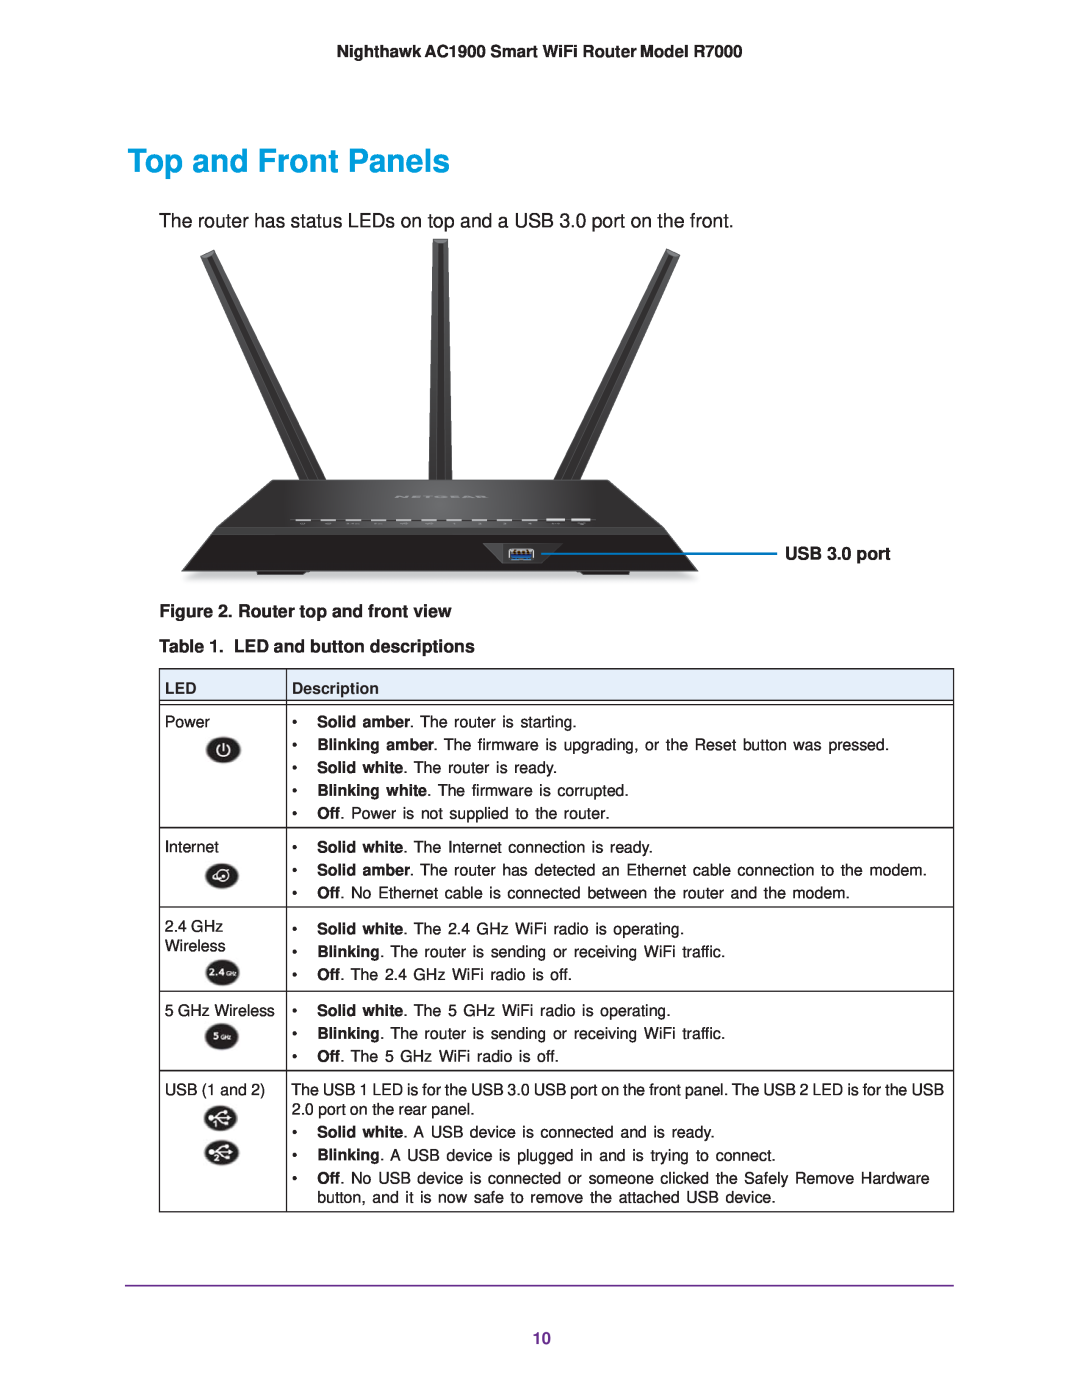 NETGEAR Top and Front Panels, Nighthawk AC1900 Smart WiFi Router Model R7000, USB 3.0 port . Router top and front view 